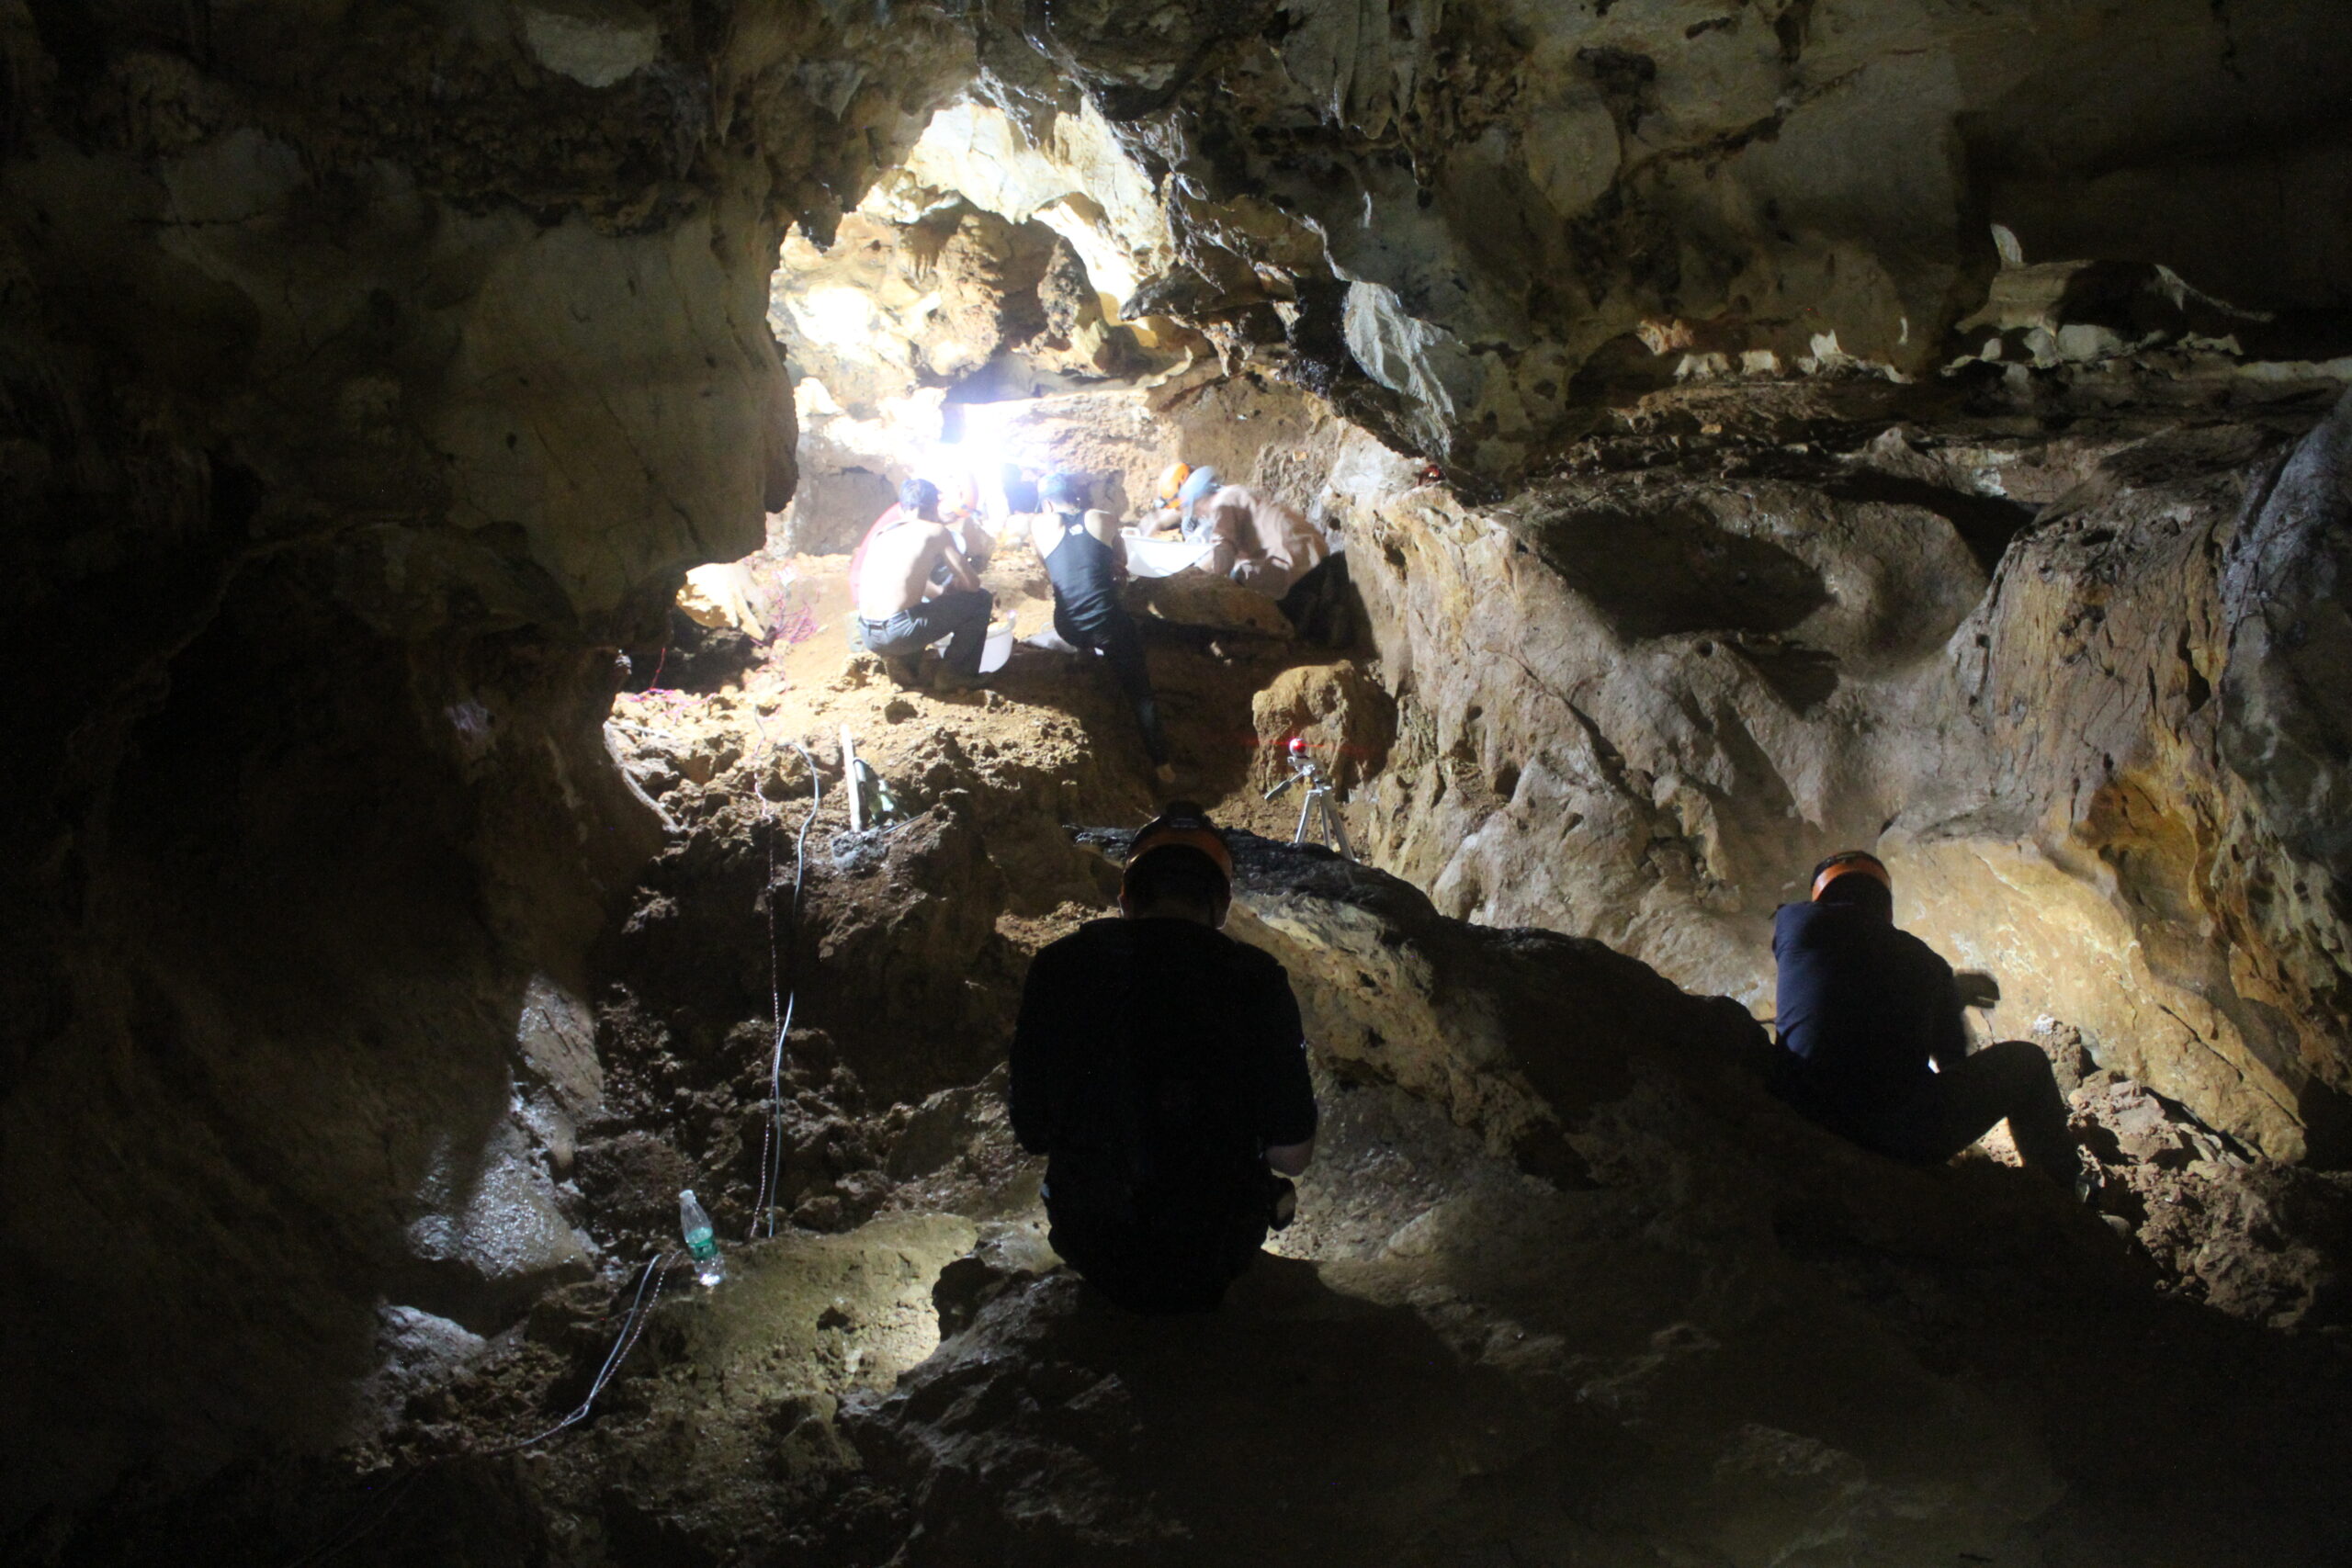 Two paleontologists are seen digging into hard cemented cave sediments.